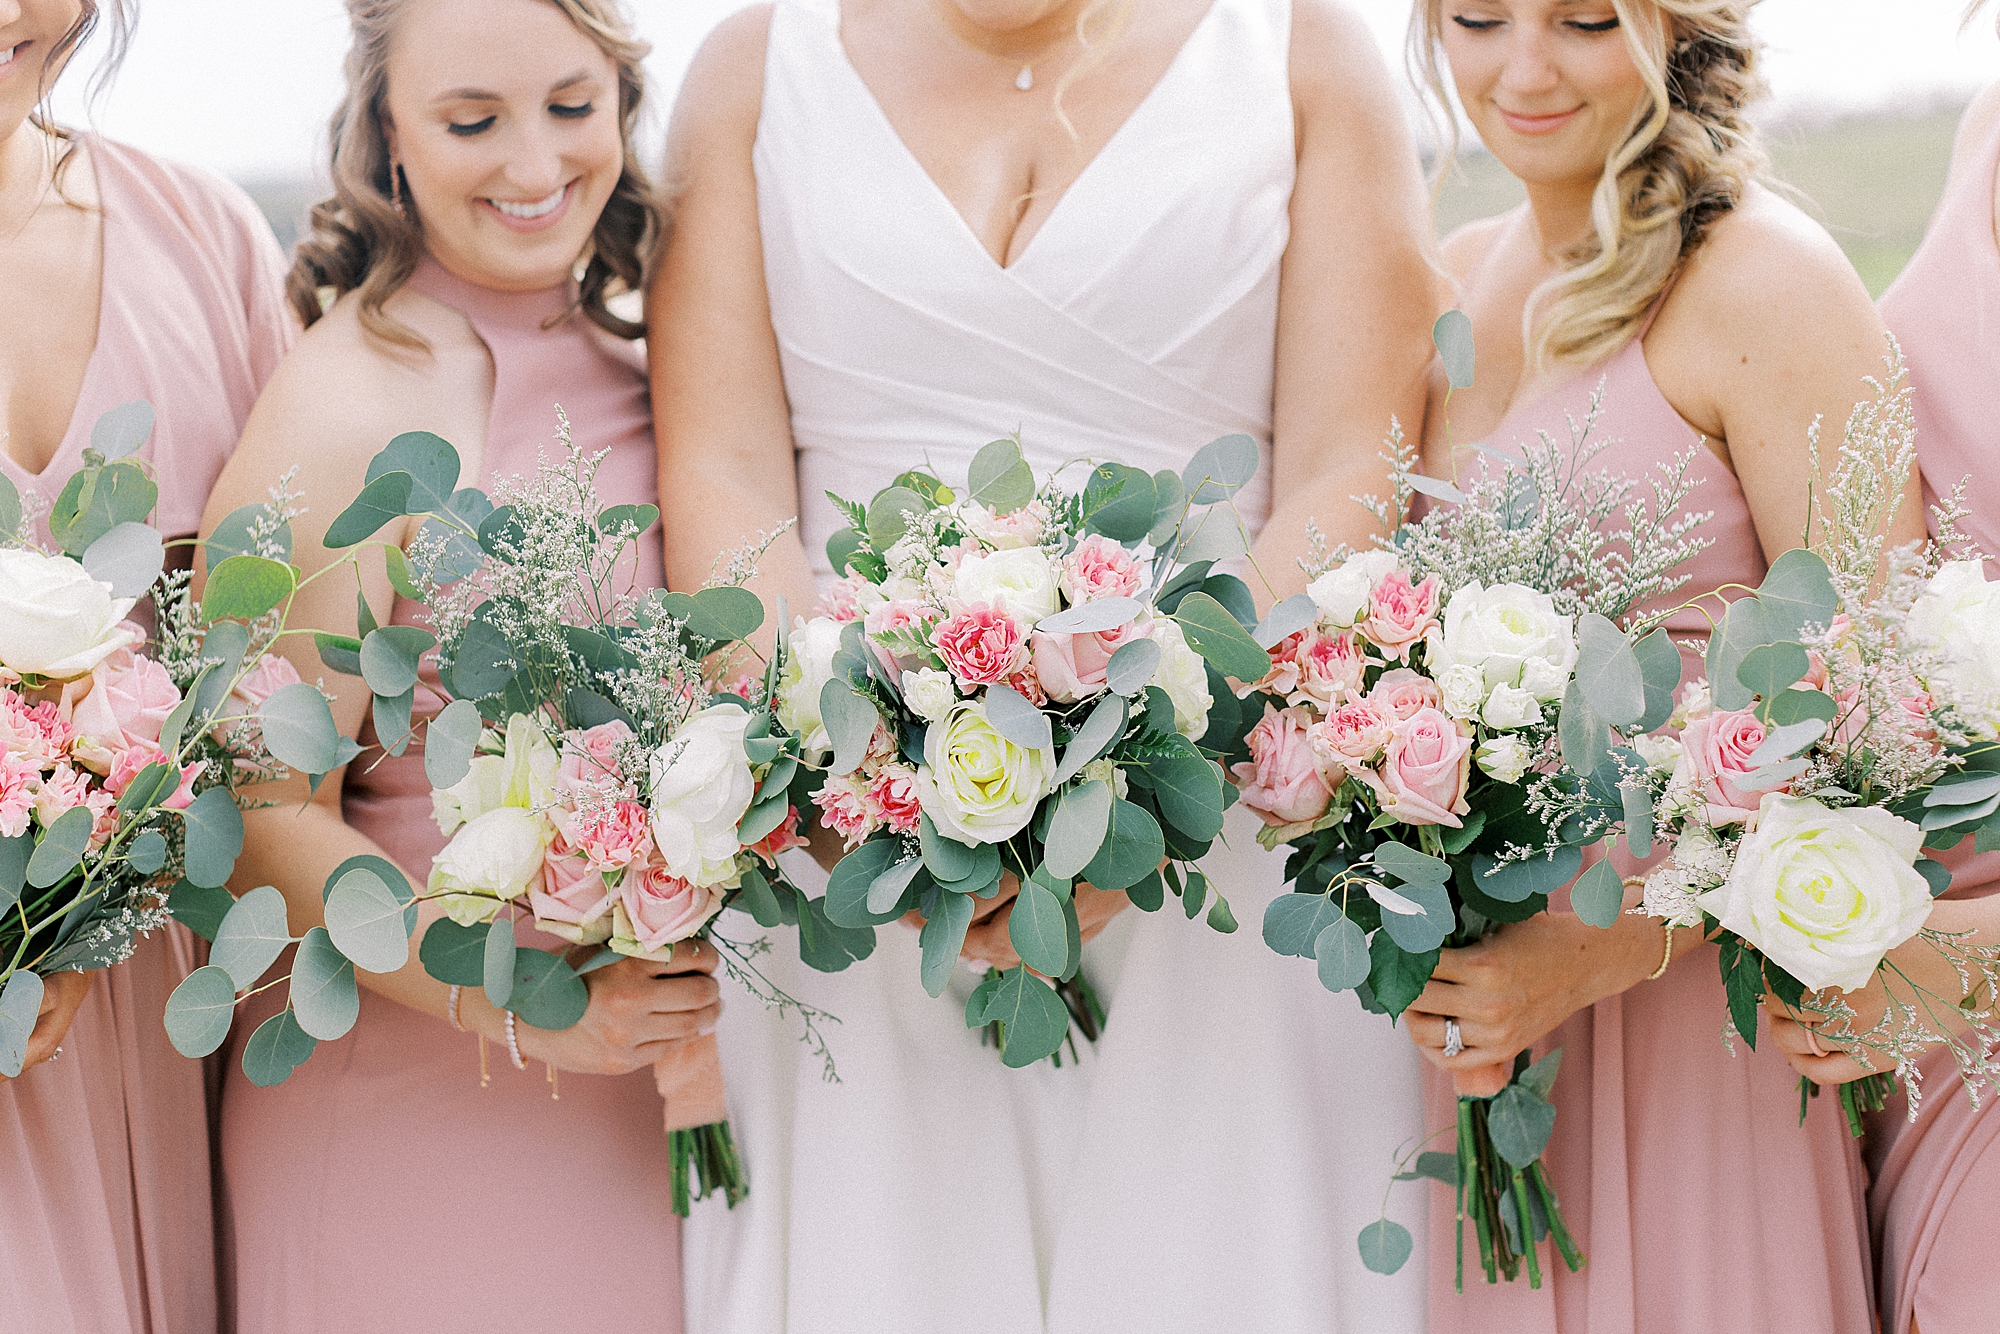 Bouquets with eucalyptus and blush roses.